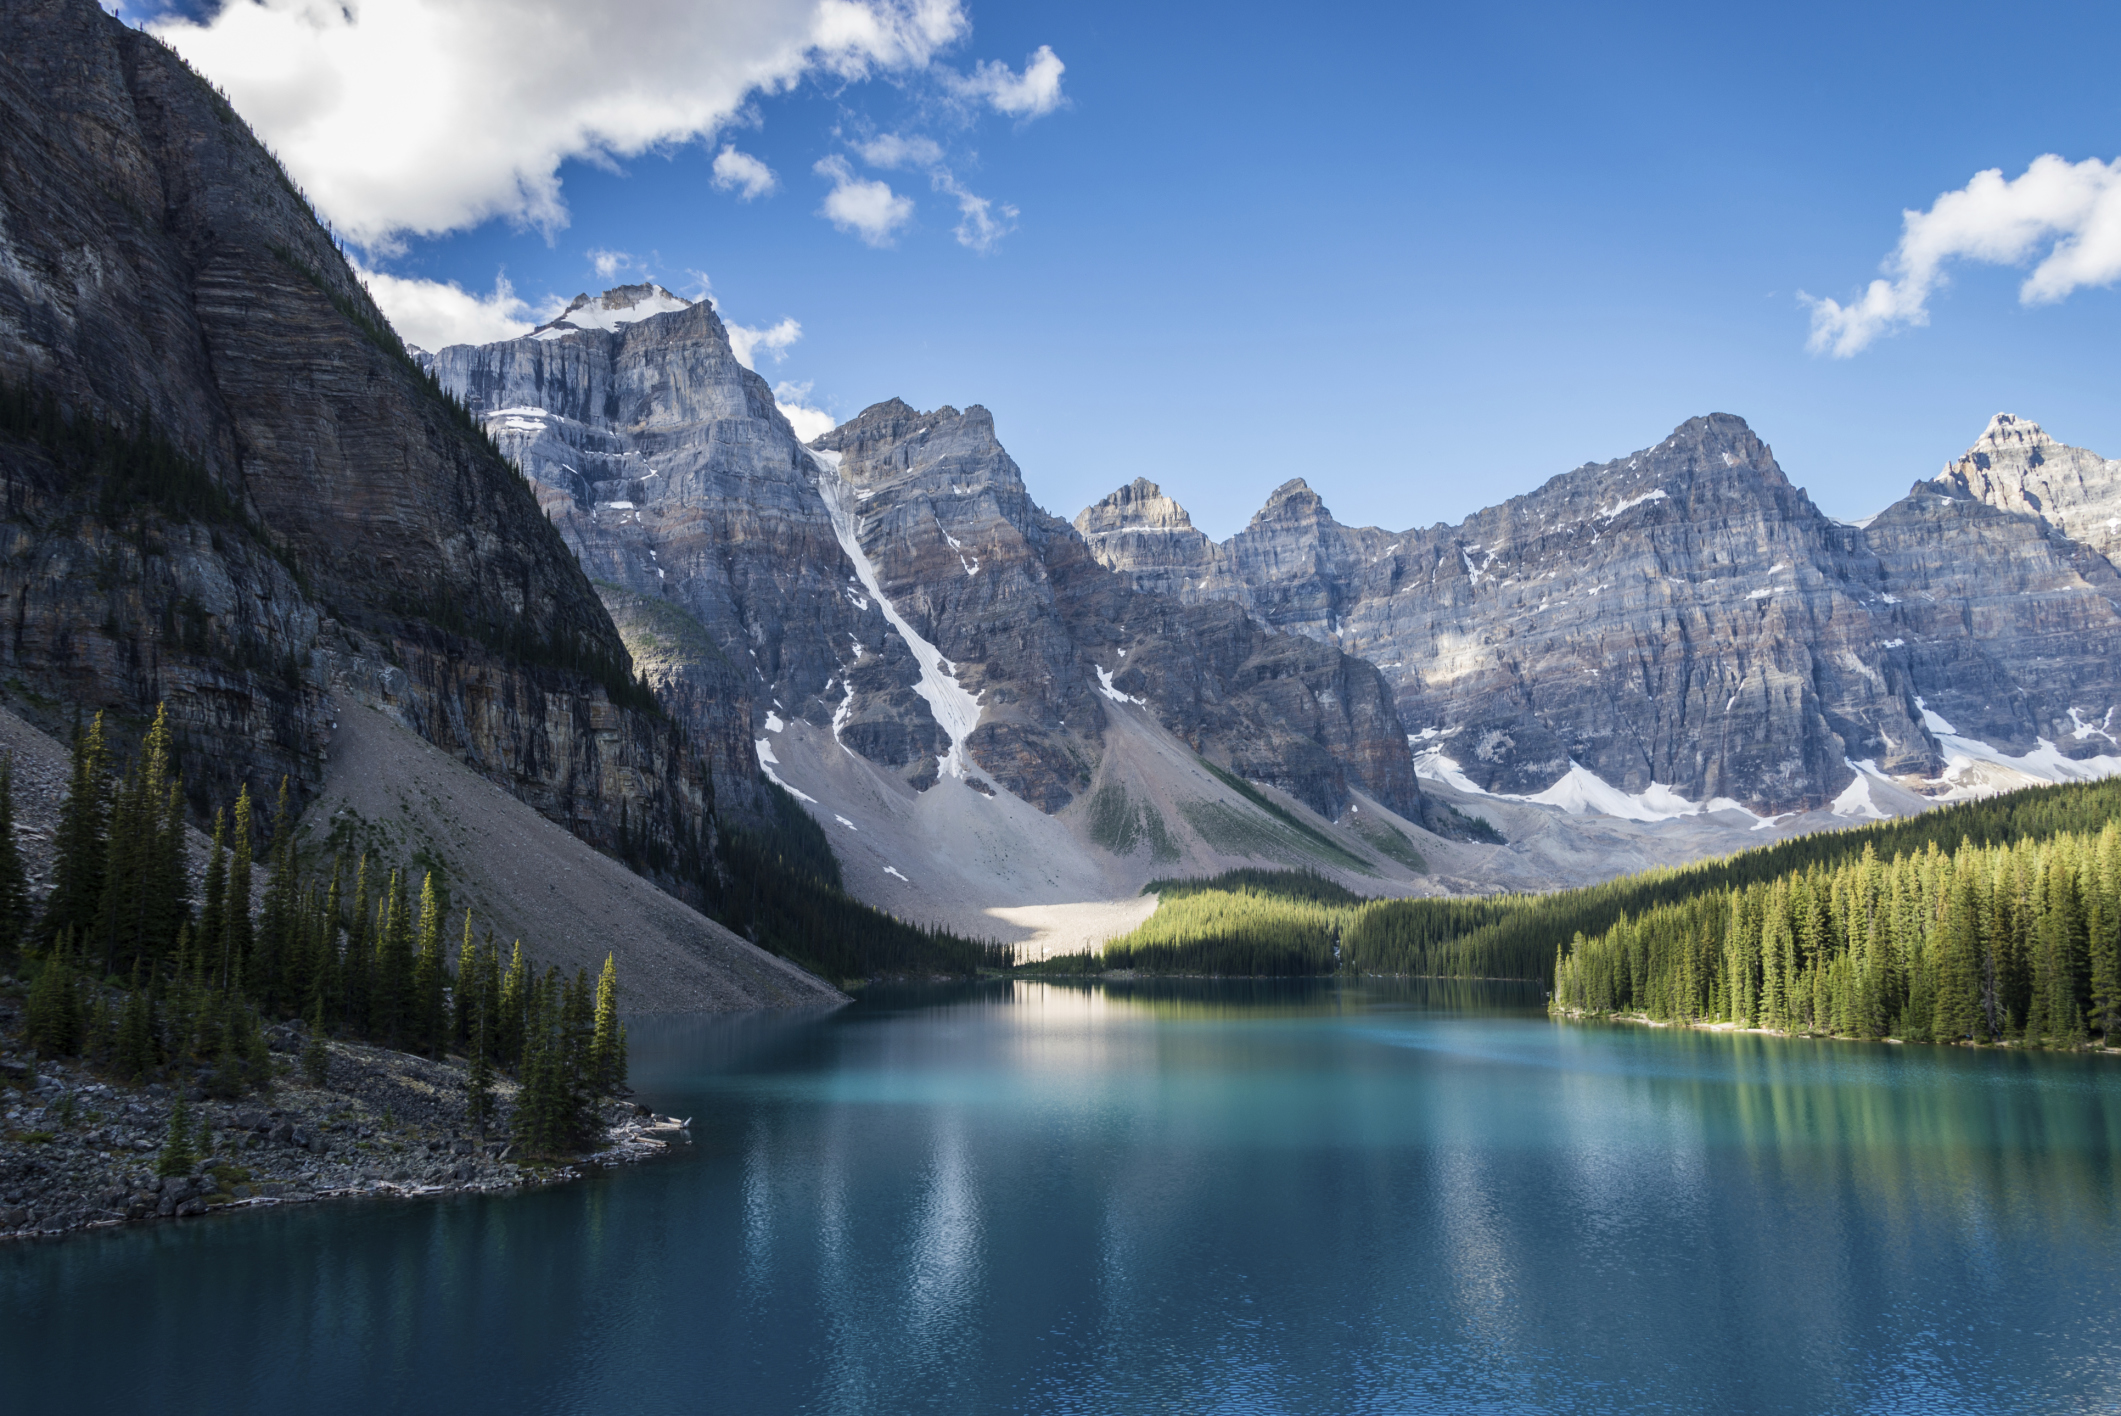 32 interesting facts about Canada